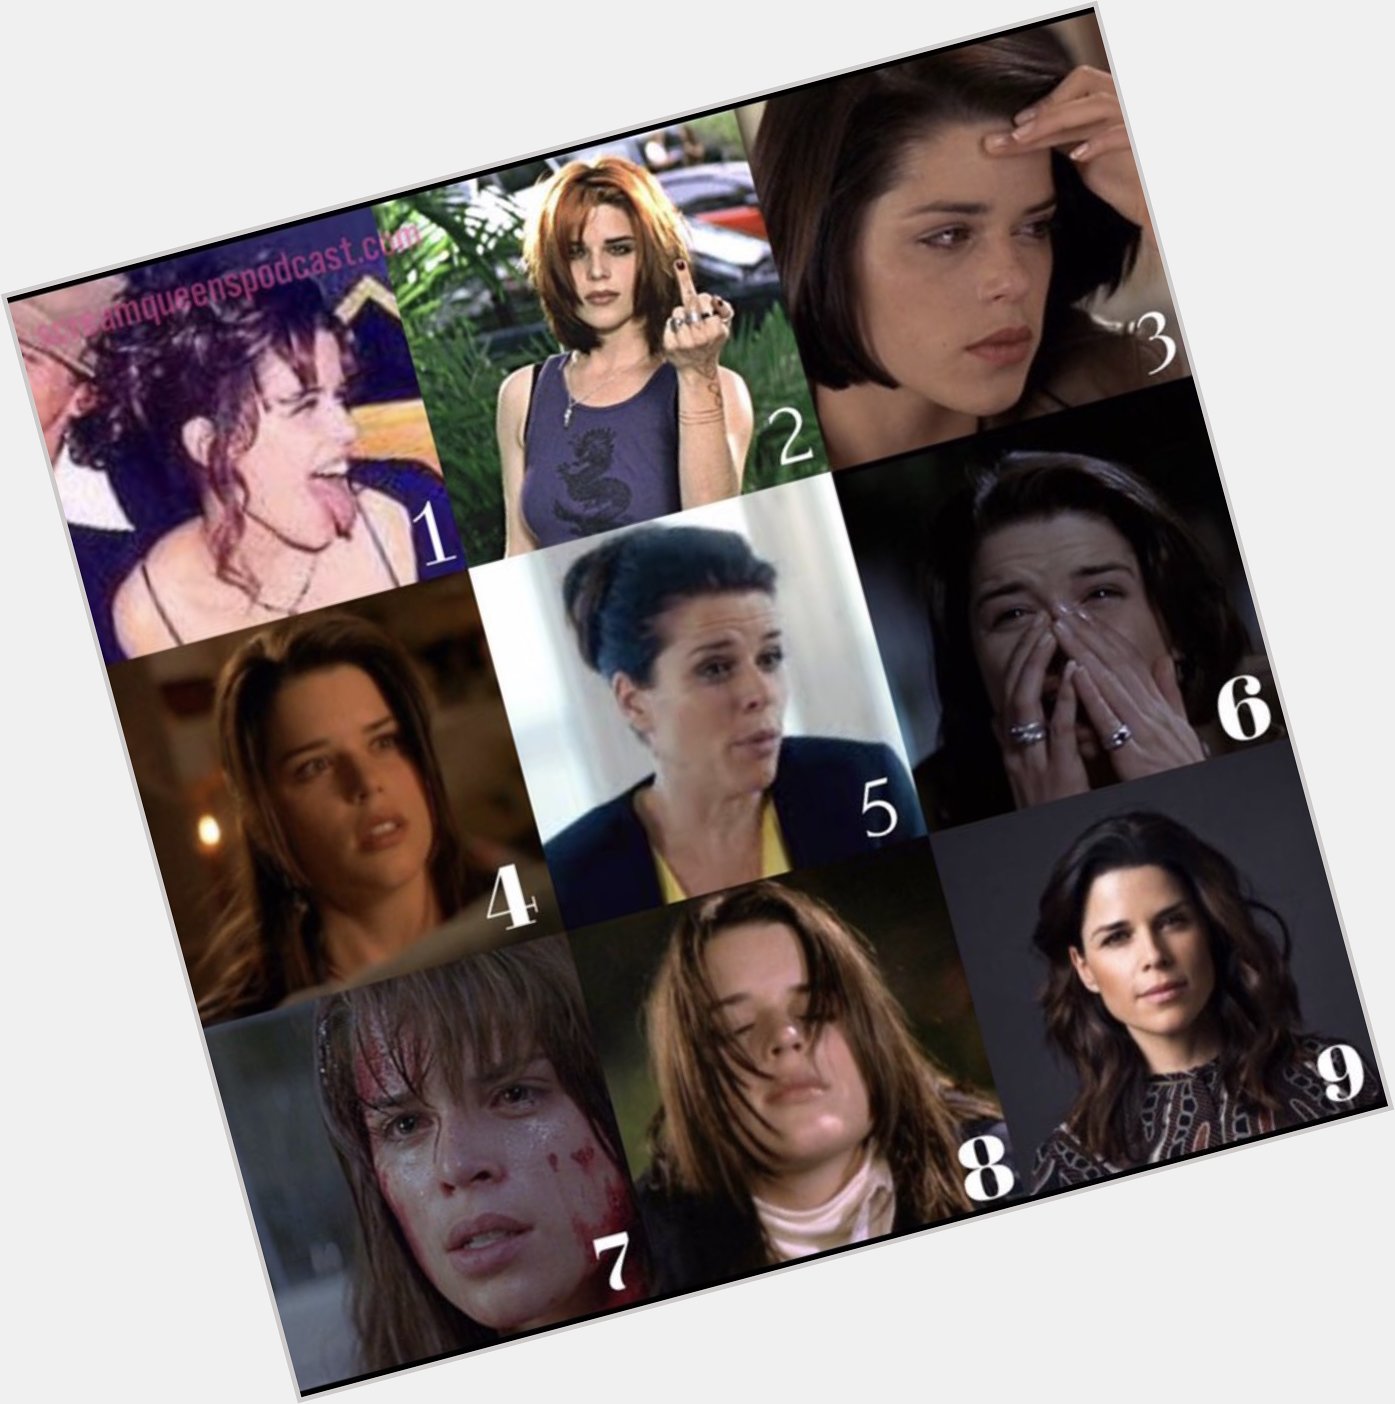 Happy Birthday To our favorite Scream Queen!!! Which Neve Campbell are you today? 